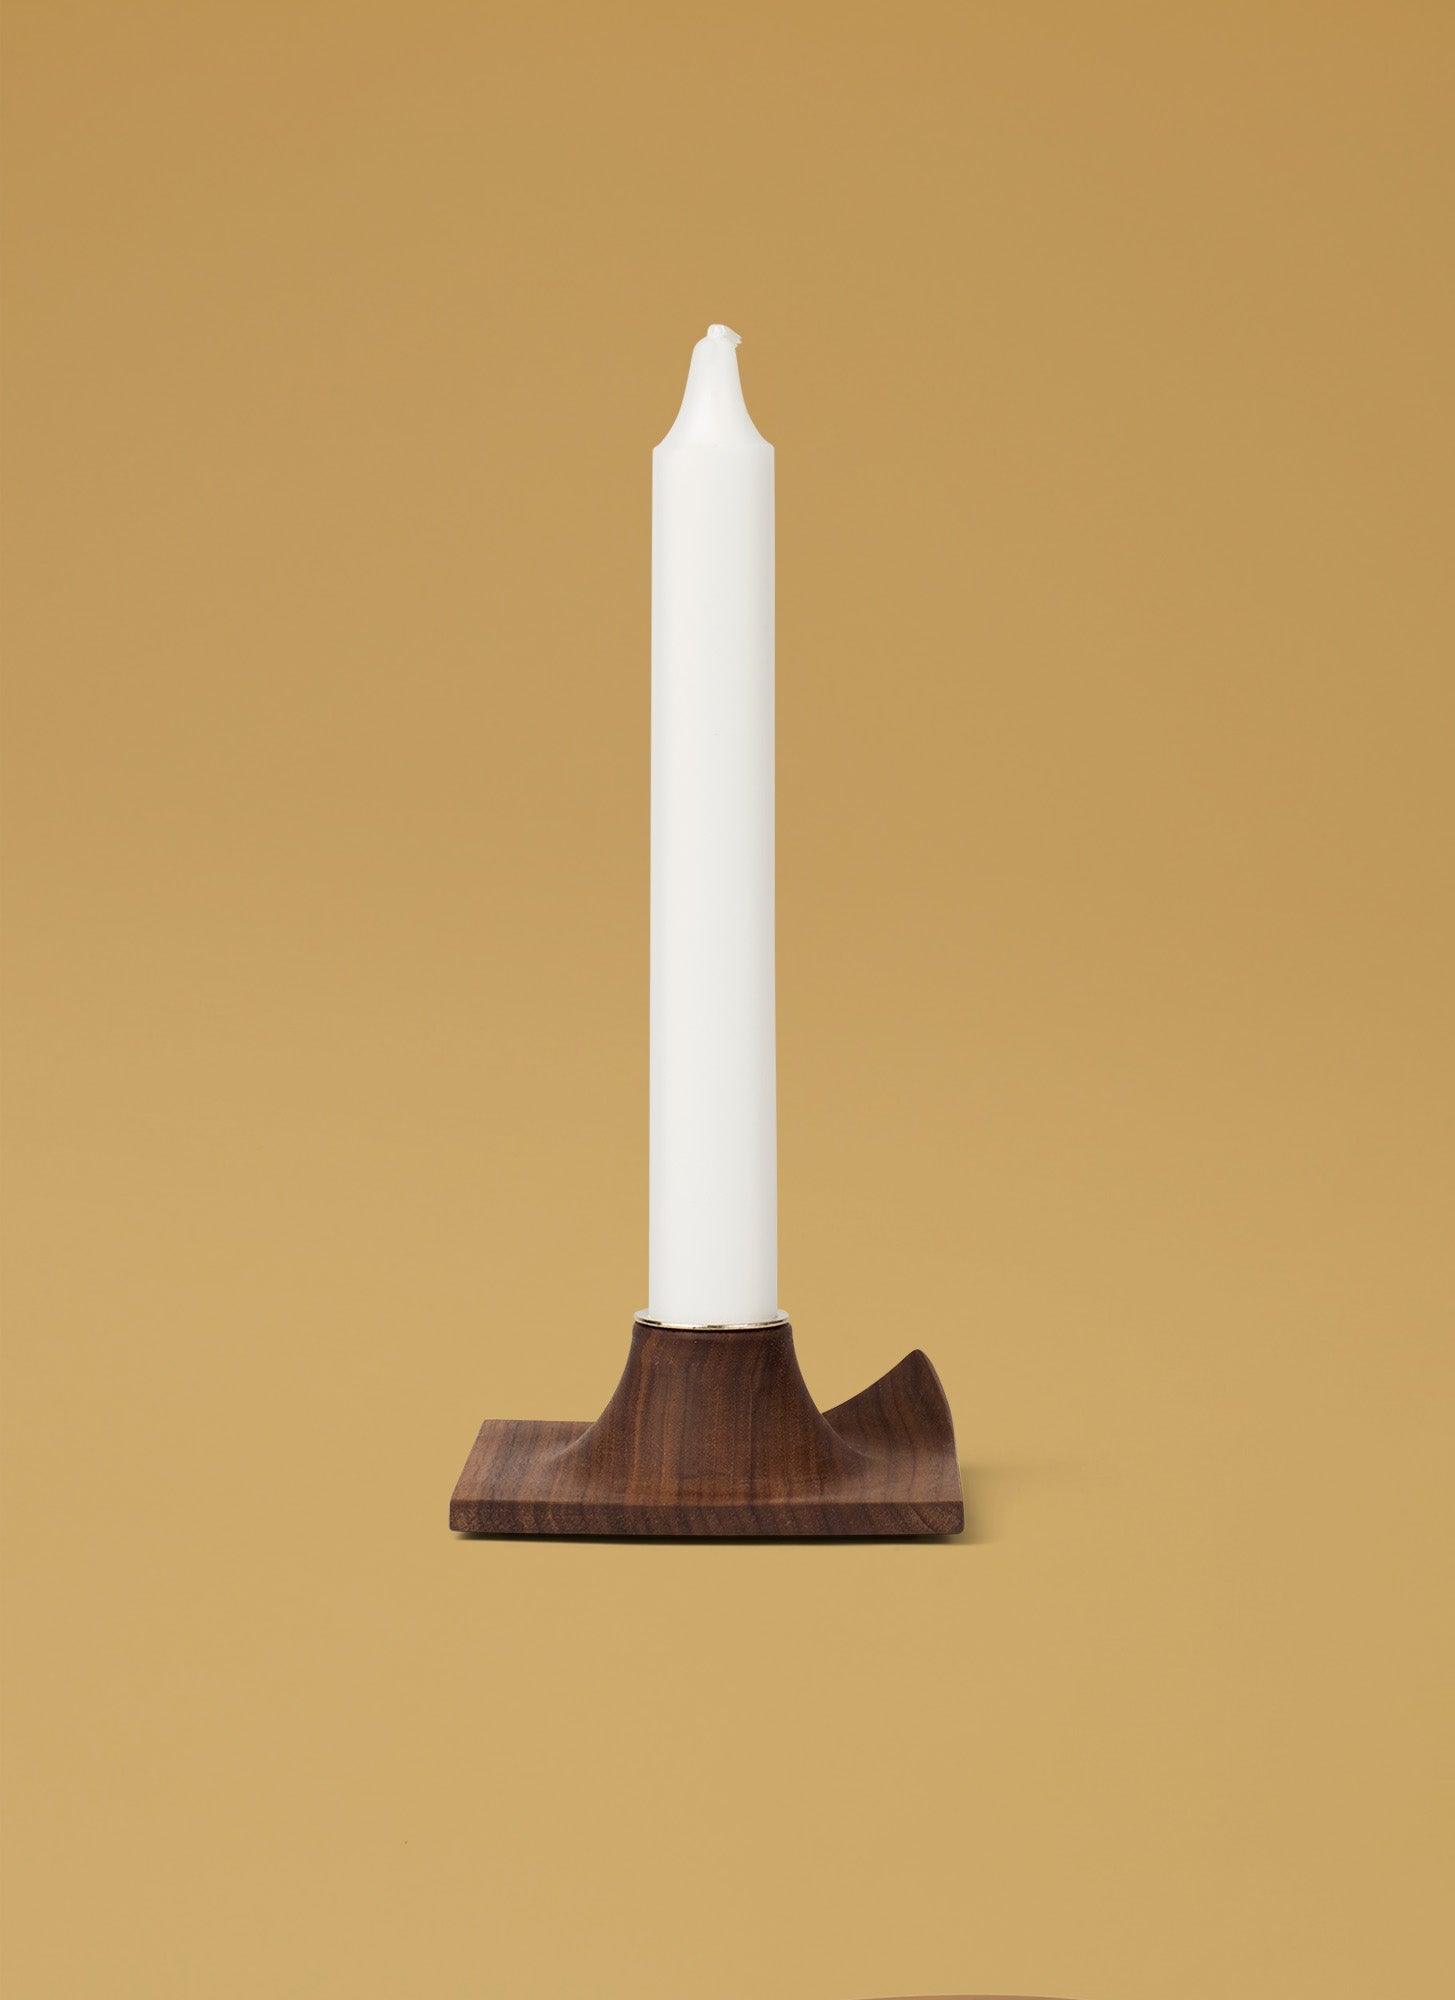 The Chamber Candlestick